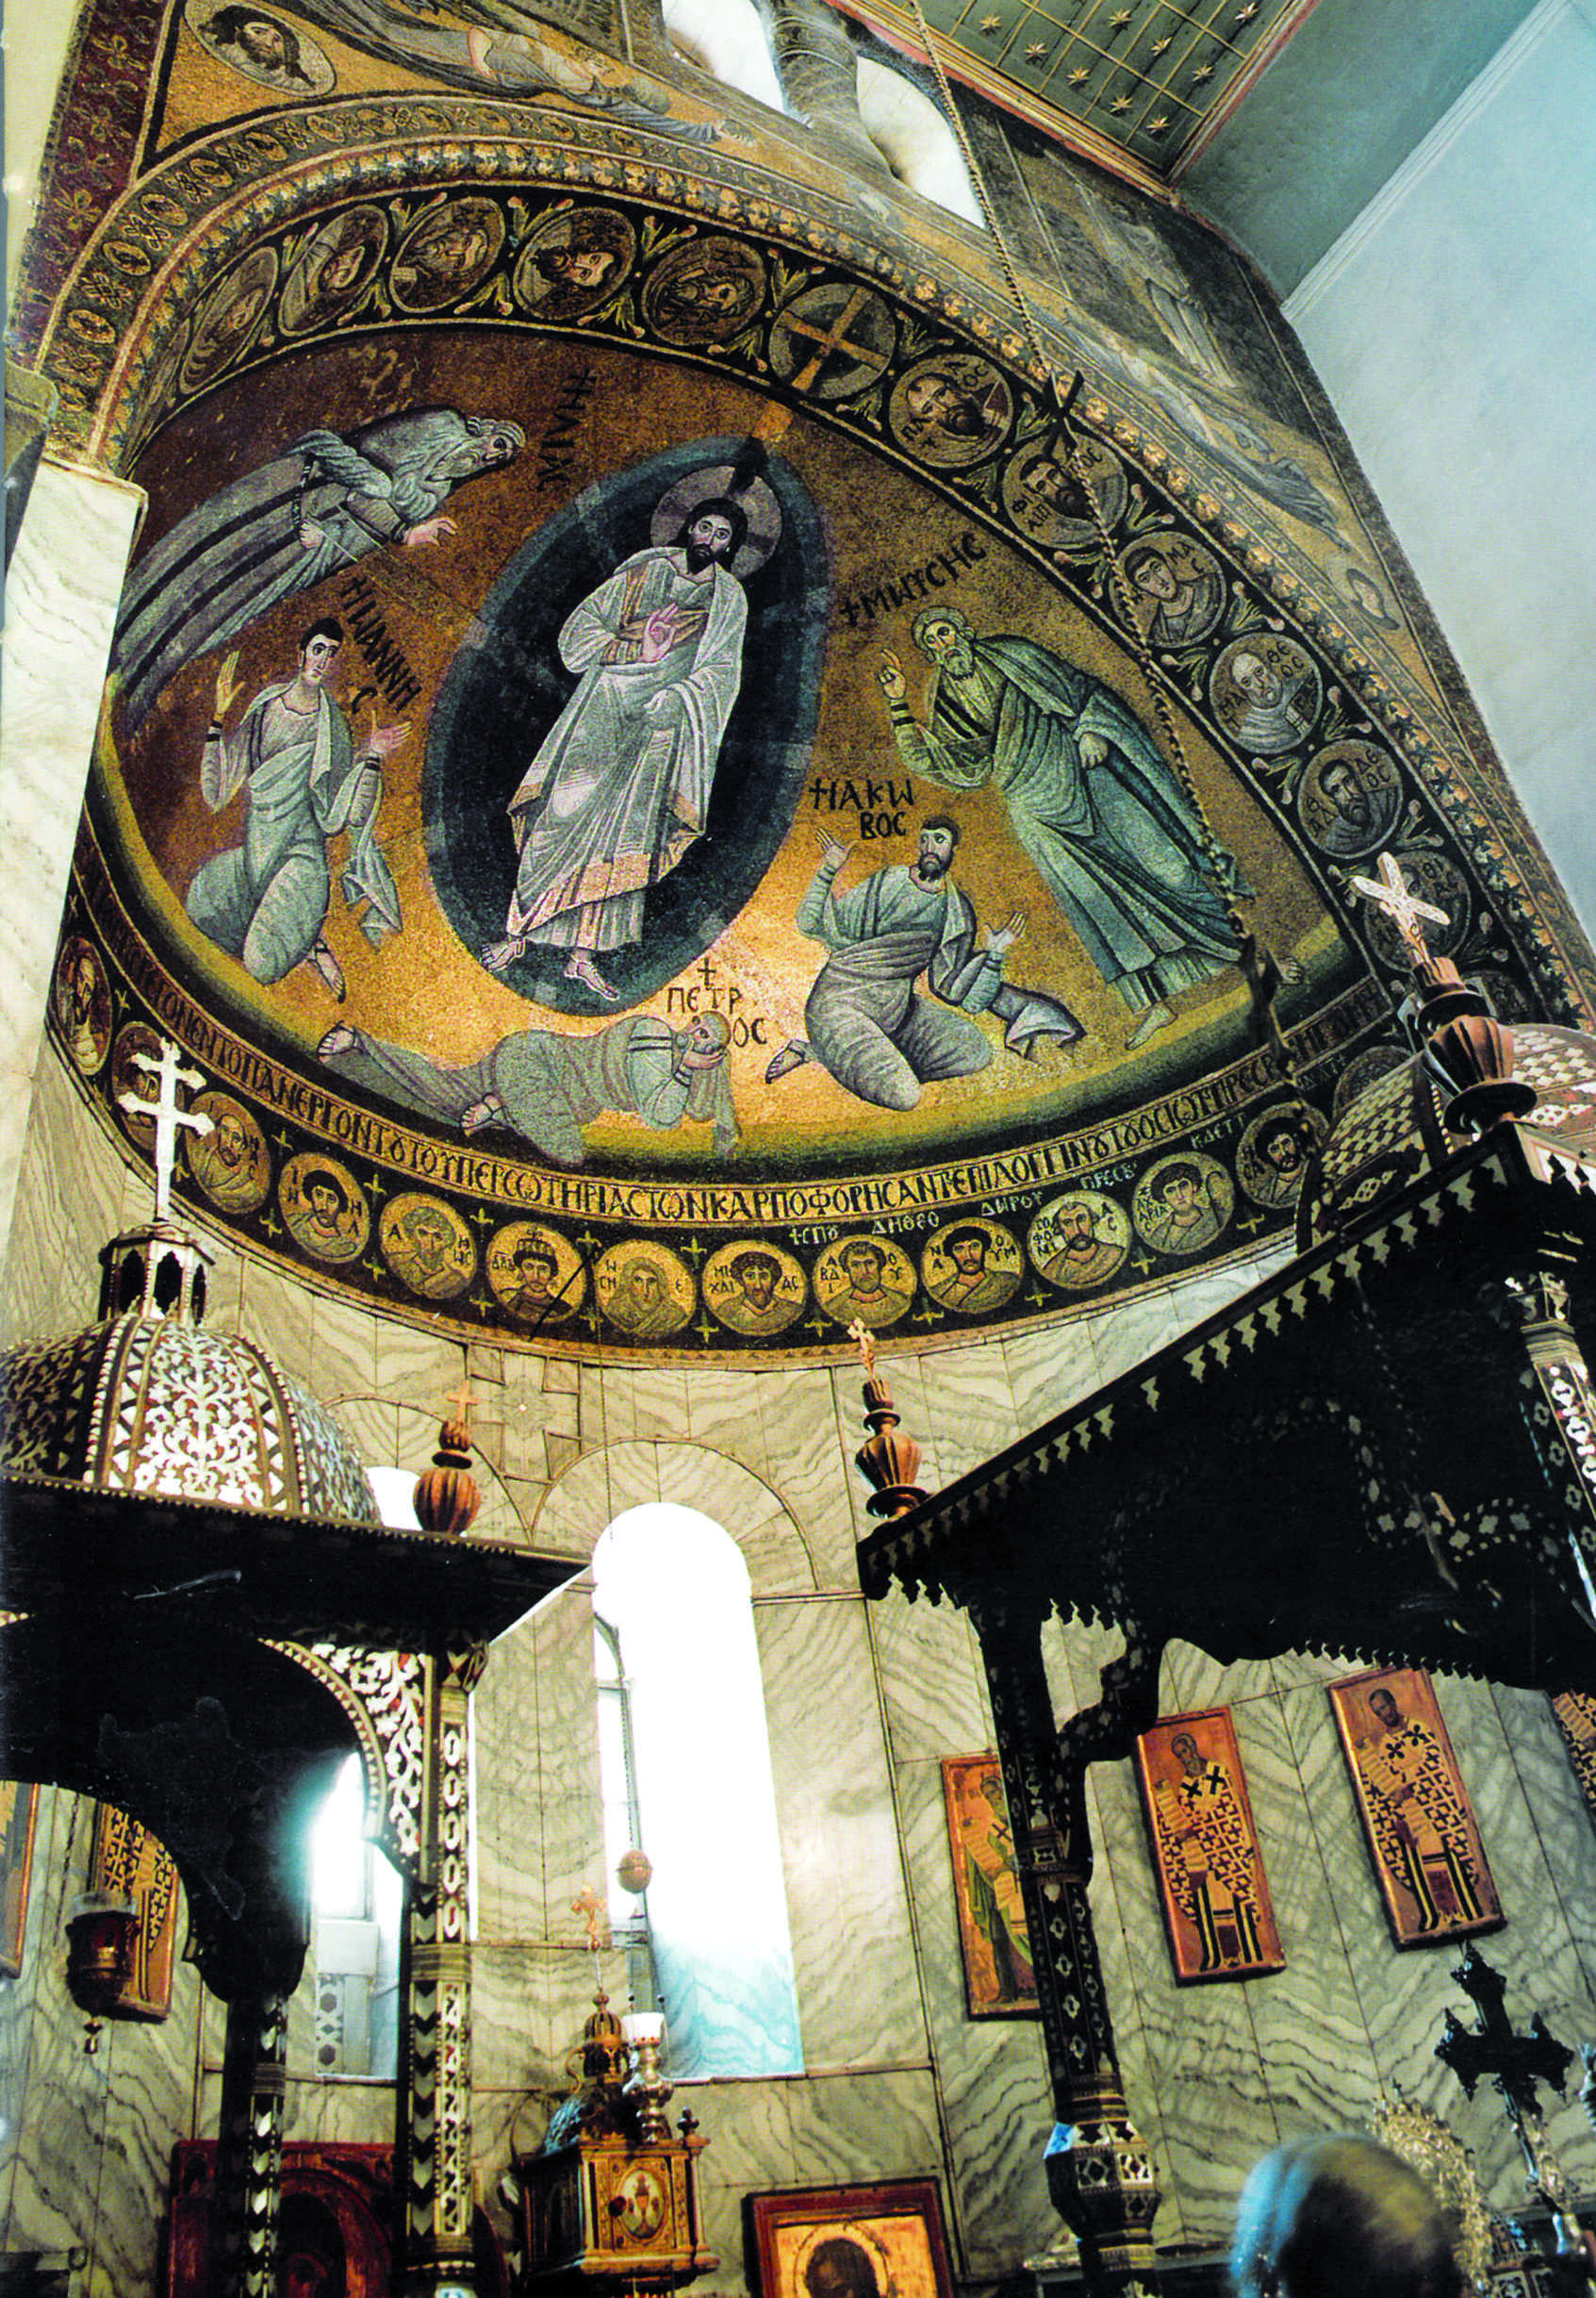 https://www.sinaimonastery.com/images/images_Symeon/mosaic_sel42a.jpg